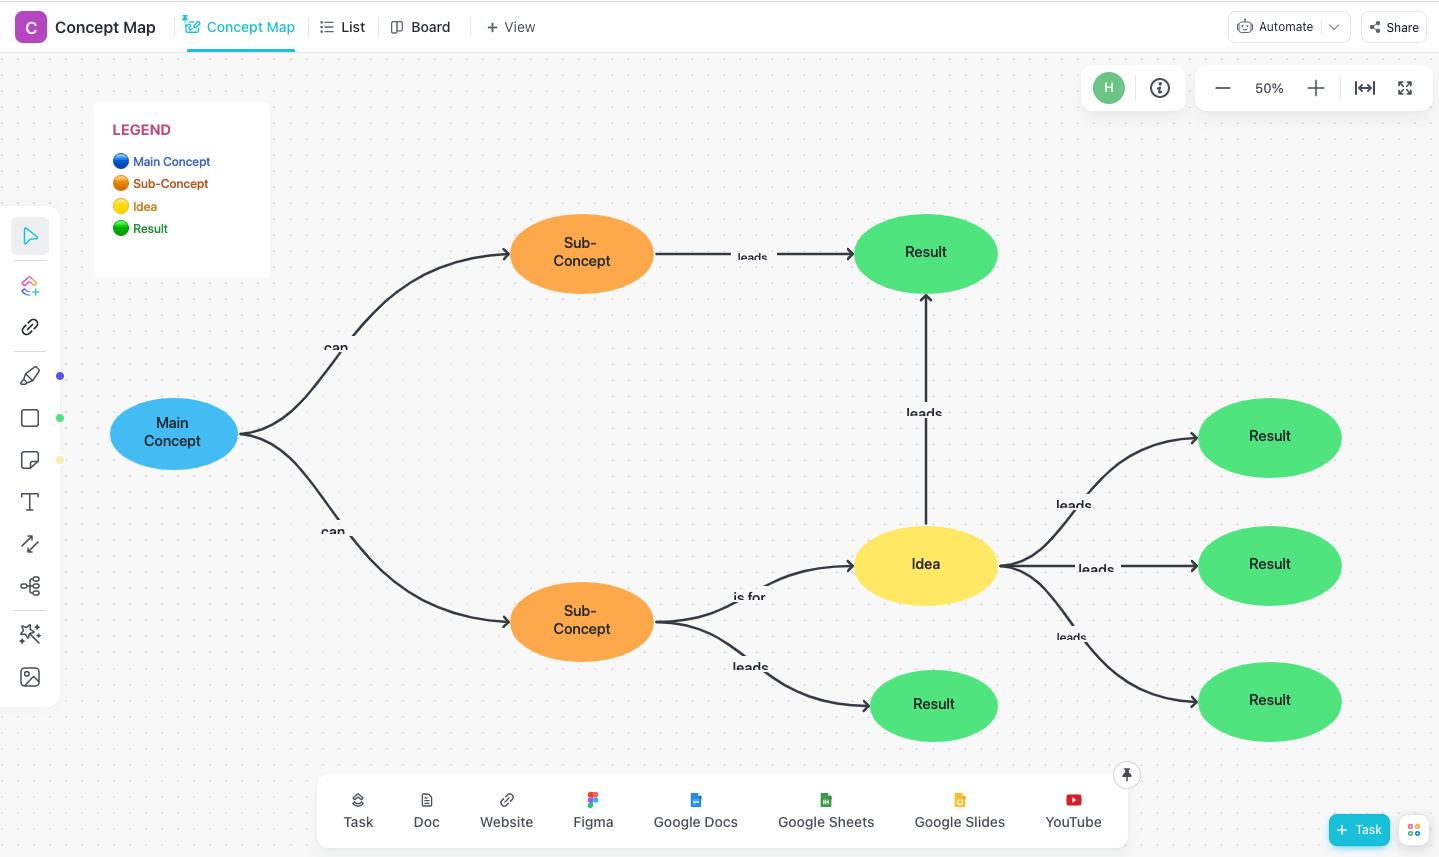 Use ClickUp’s Concept Map Template to organize your ideas and make connections between them